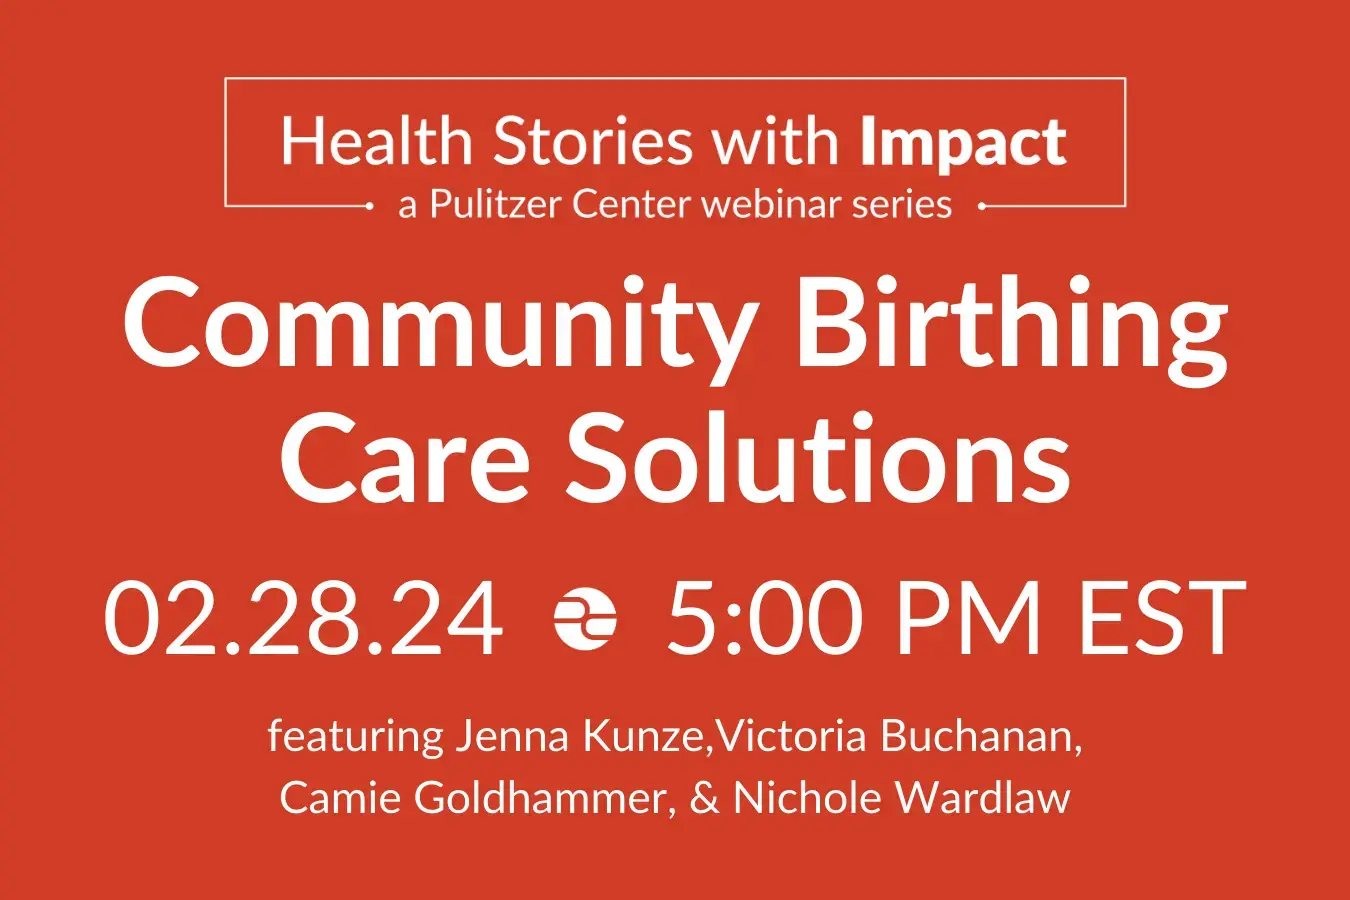 Community Birthing Care Solutions